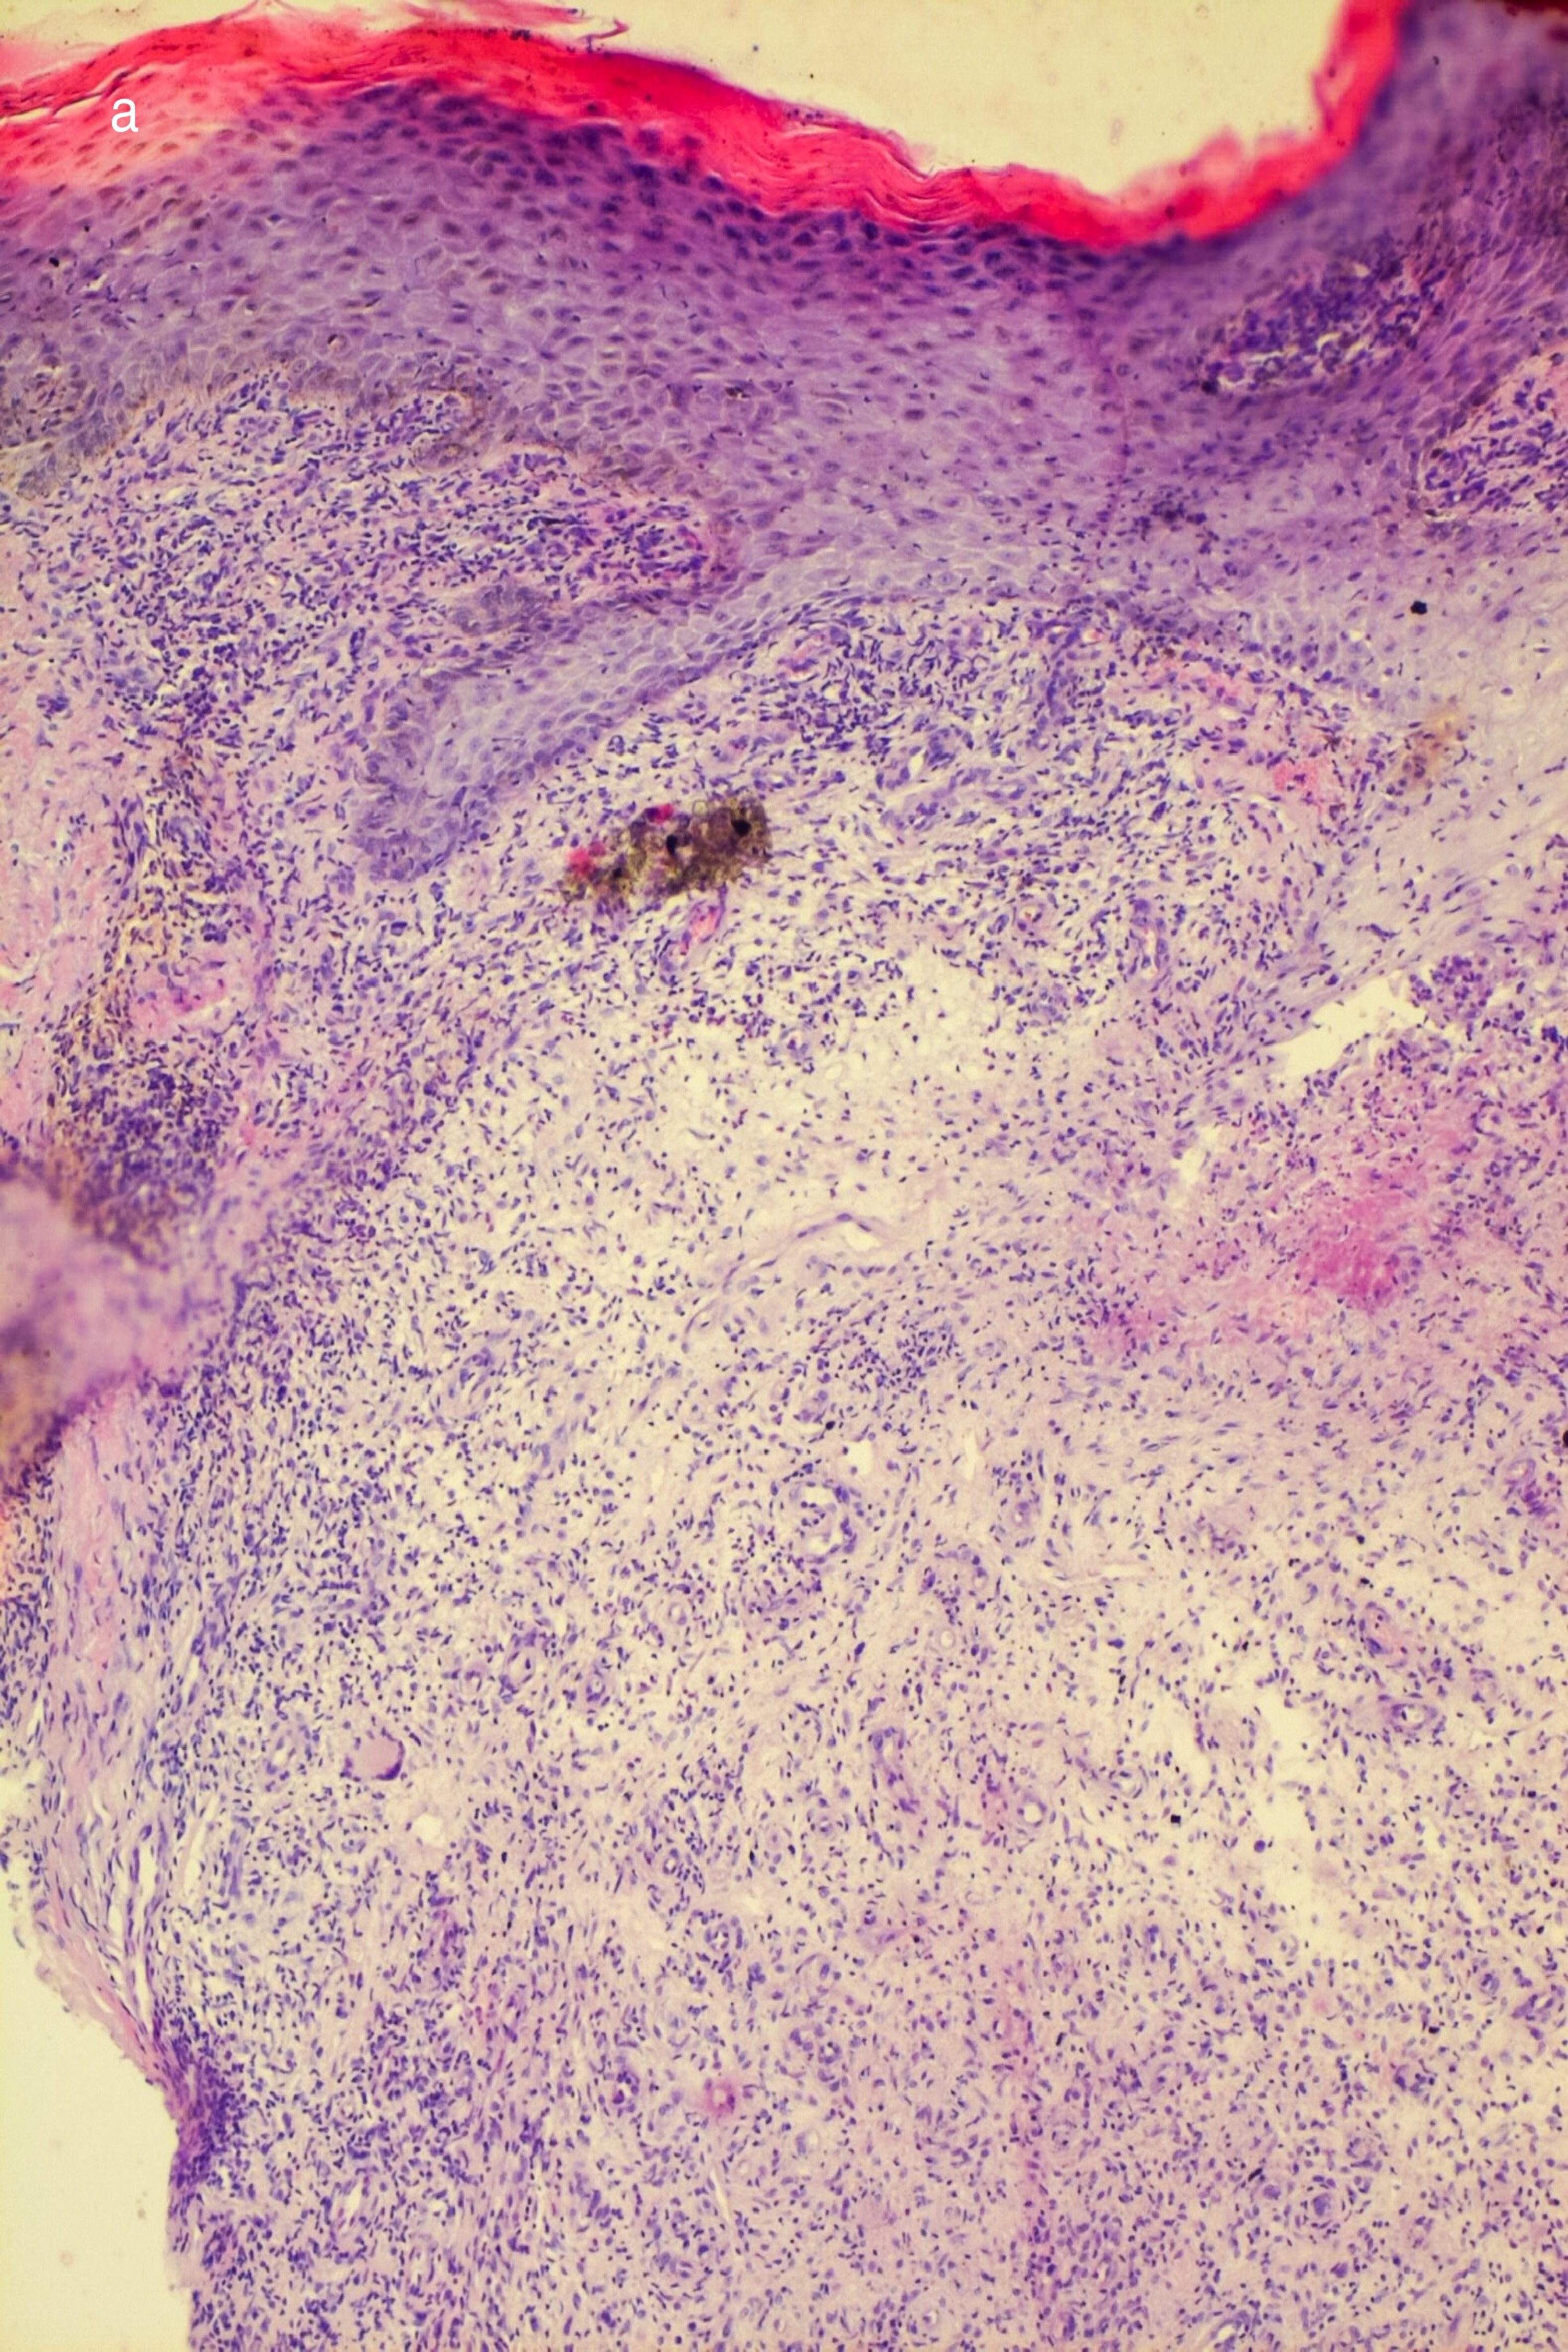 Epidermal hyperplasia and upper dermal granulomatous infiltrate with giant cells (hematoxylin and eosin 100×)